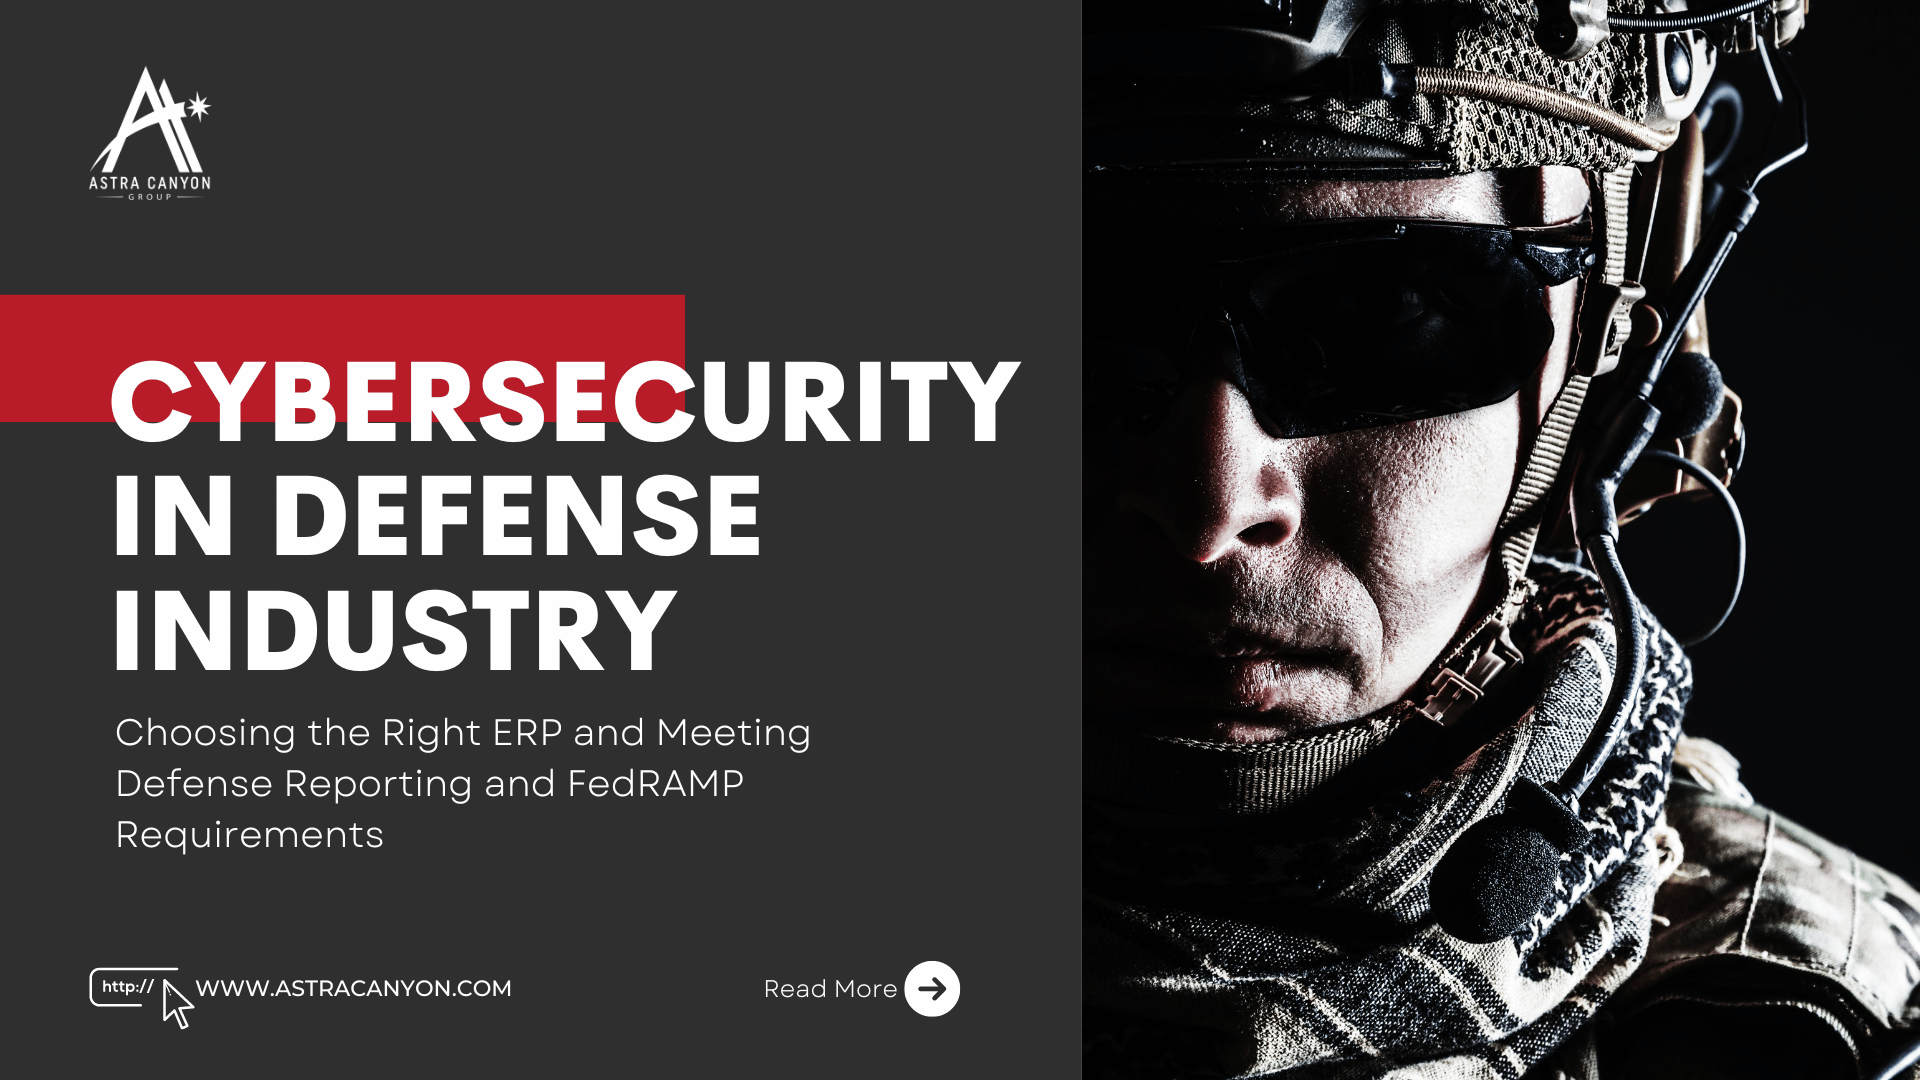 Cybersecurity in the Defense Industry: Choosing the Right ERP and Meeting Defense Reporting and FedRAMP Requirements